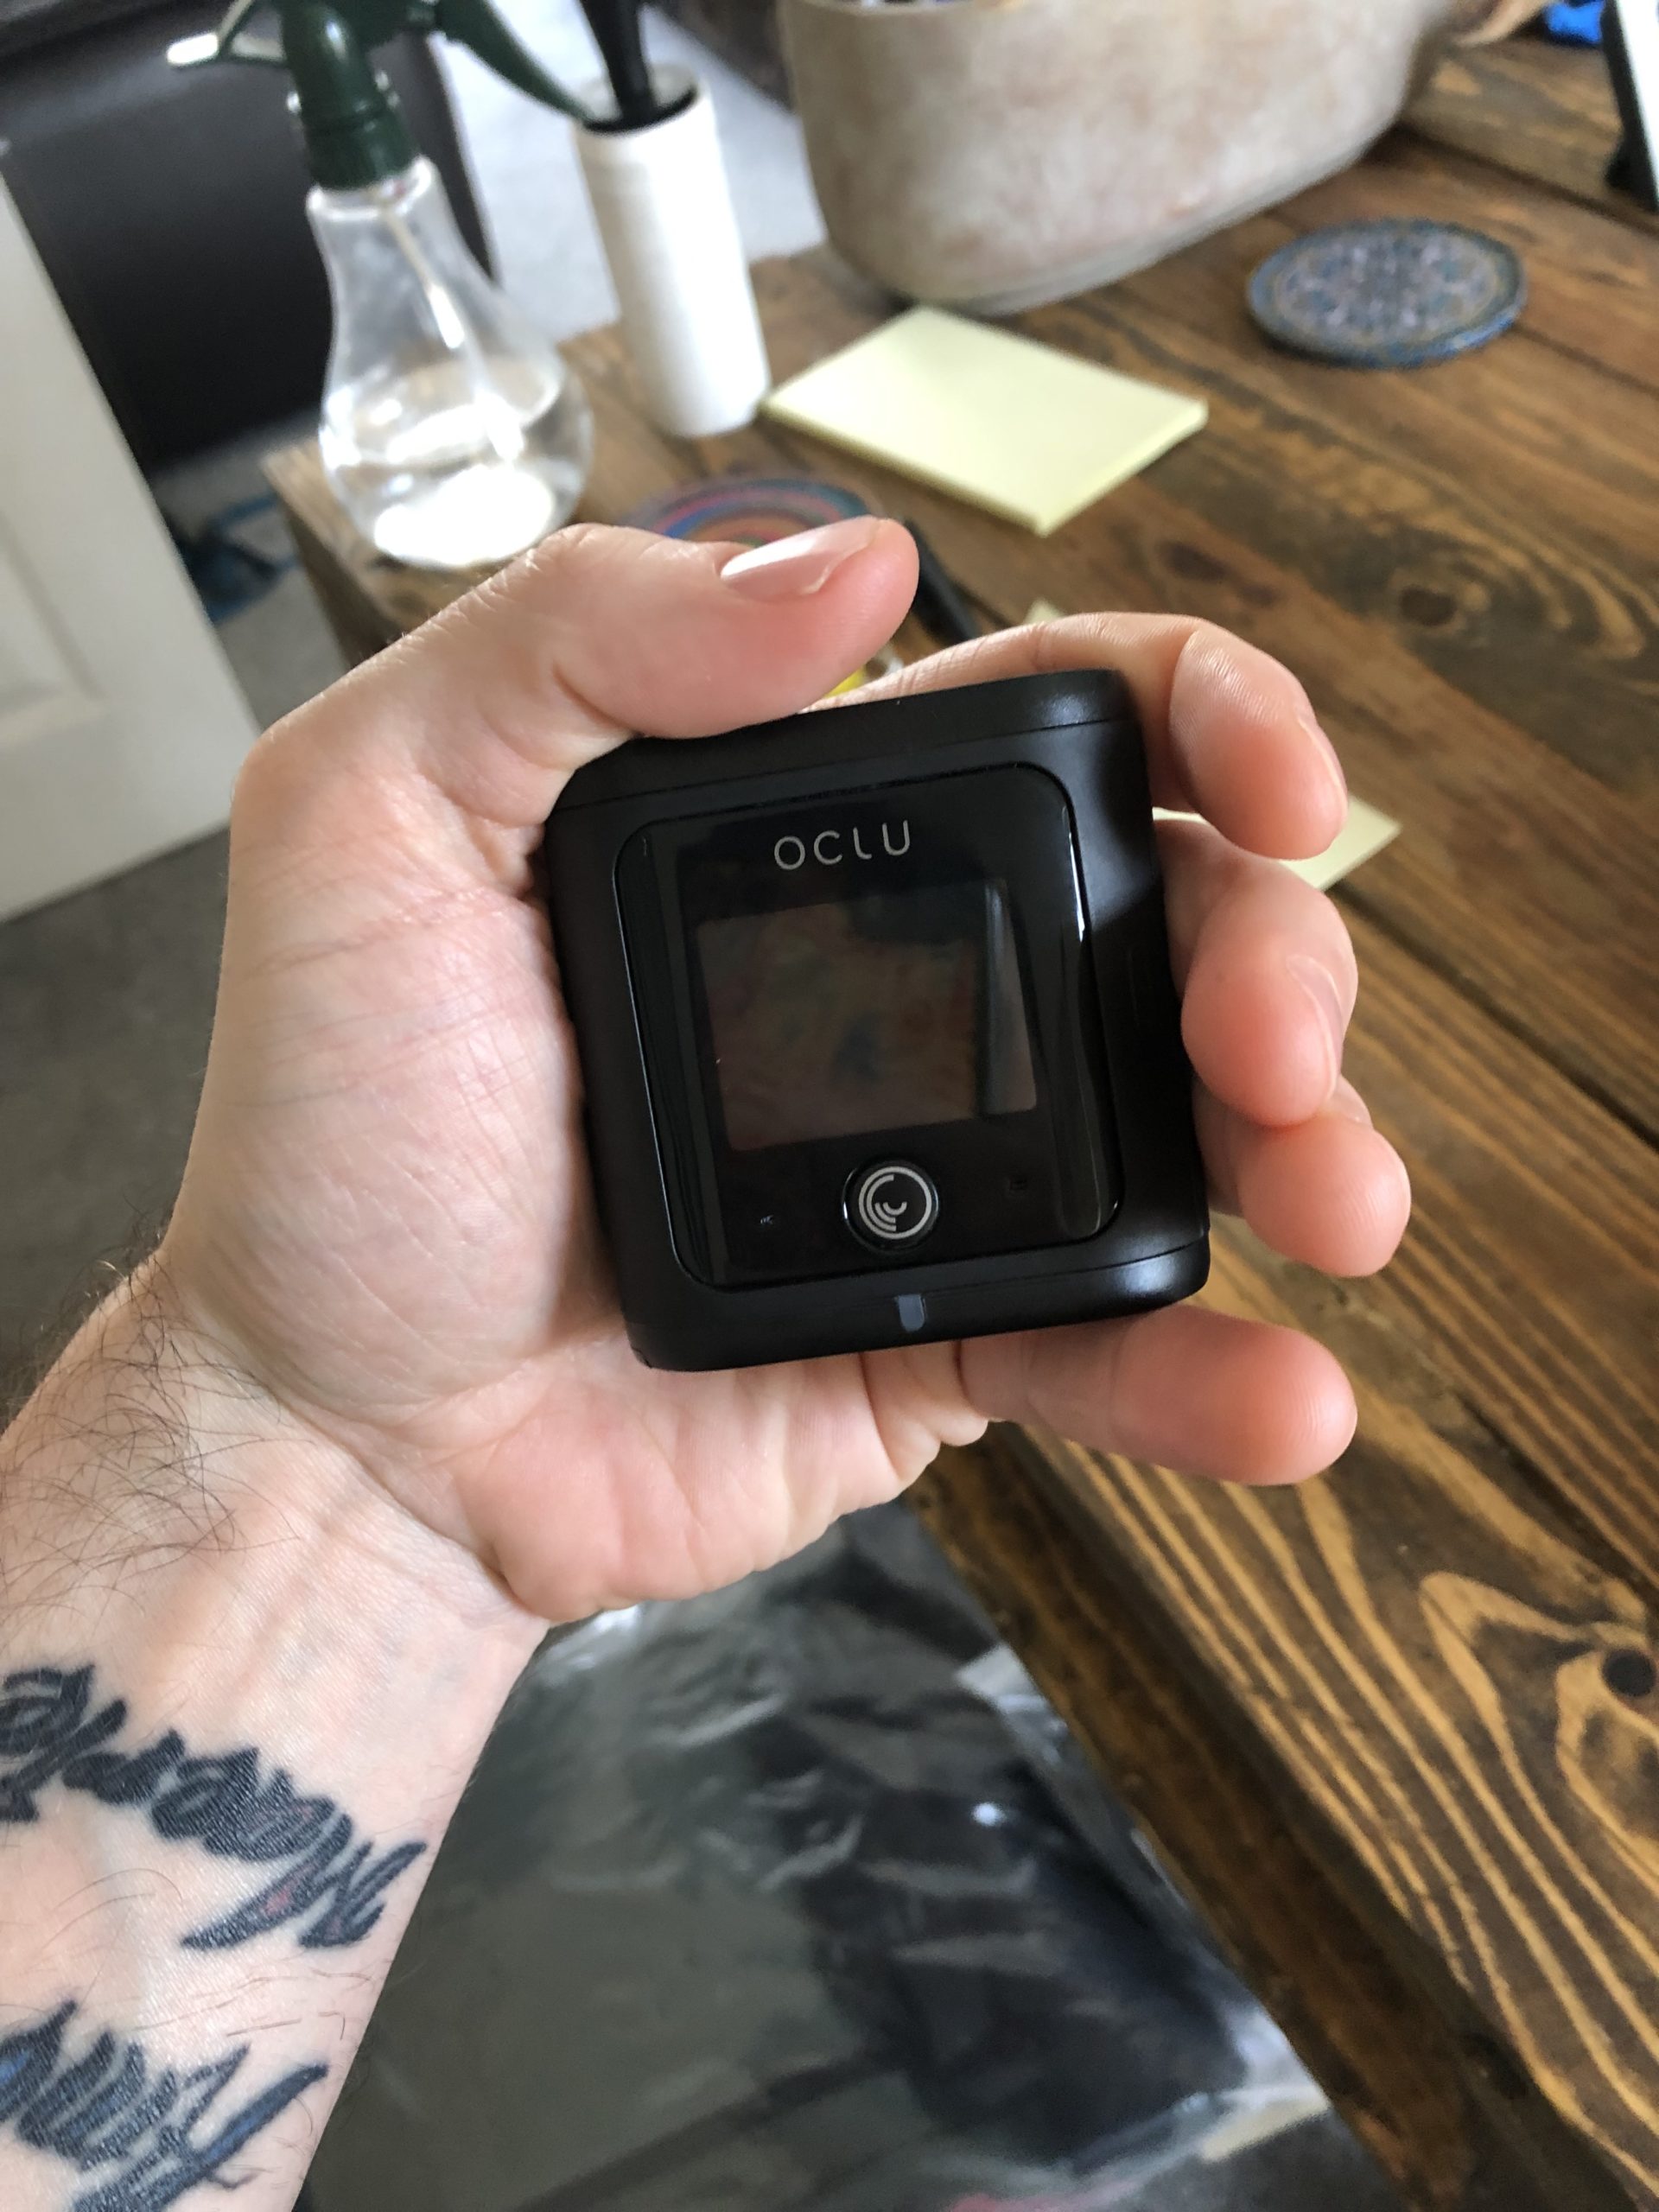 The OCLU camera fits in the palm of one's hand!